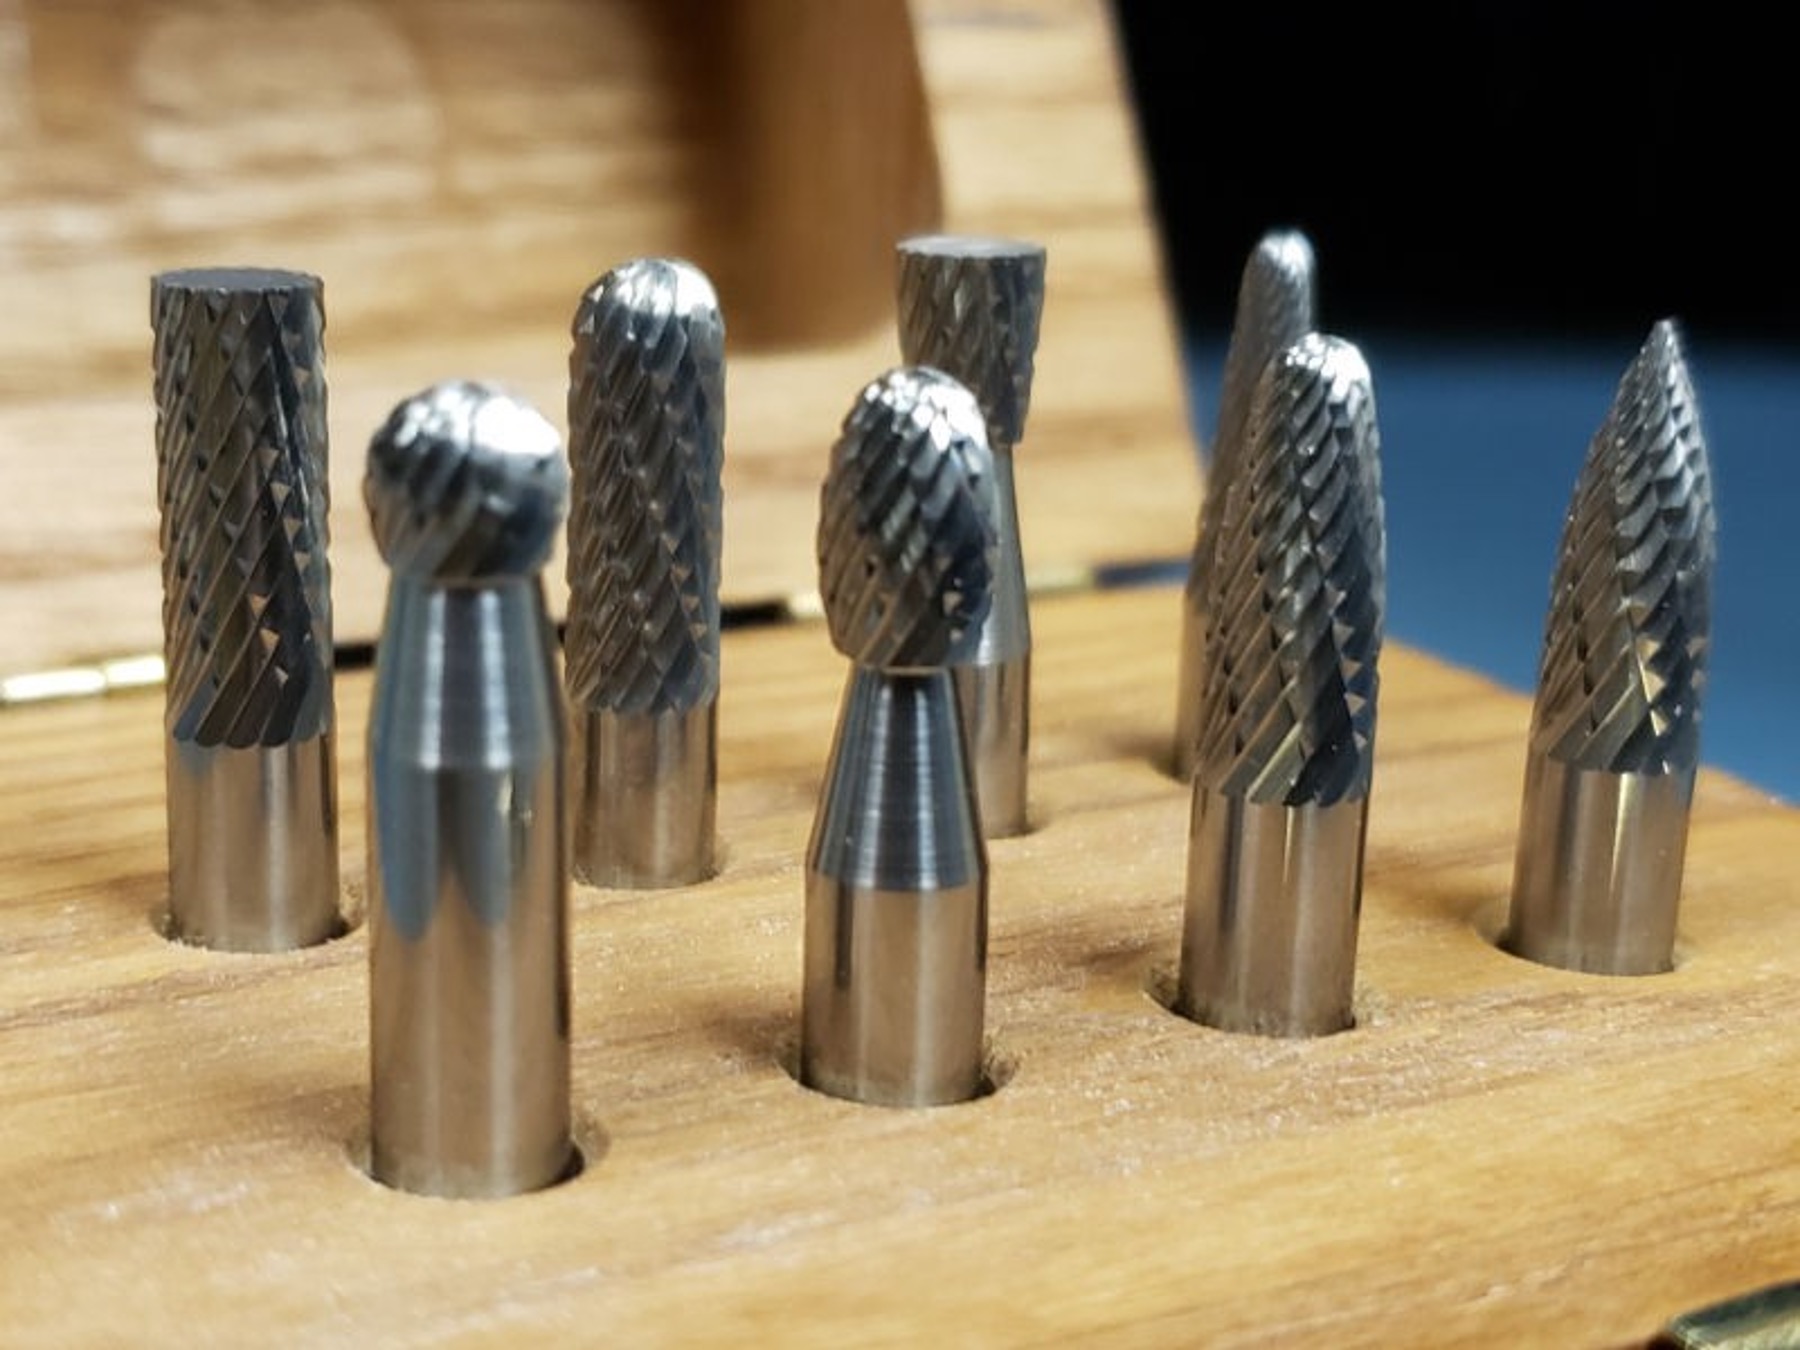 Carbide Die Grinder Bits: The Key to Precision and Efficiency - shape, material, longevity, grinder bits, efficiency, design, carbide